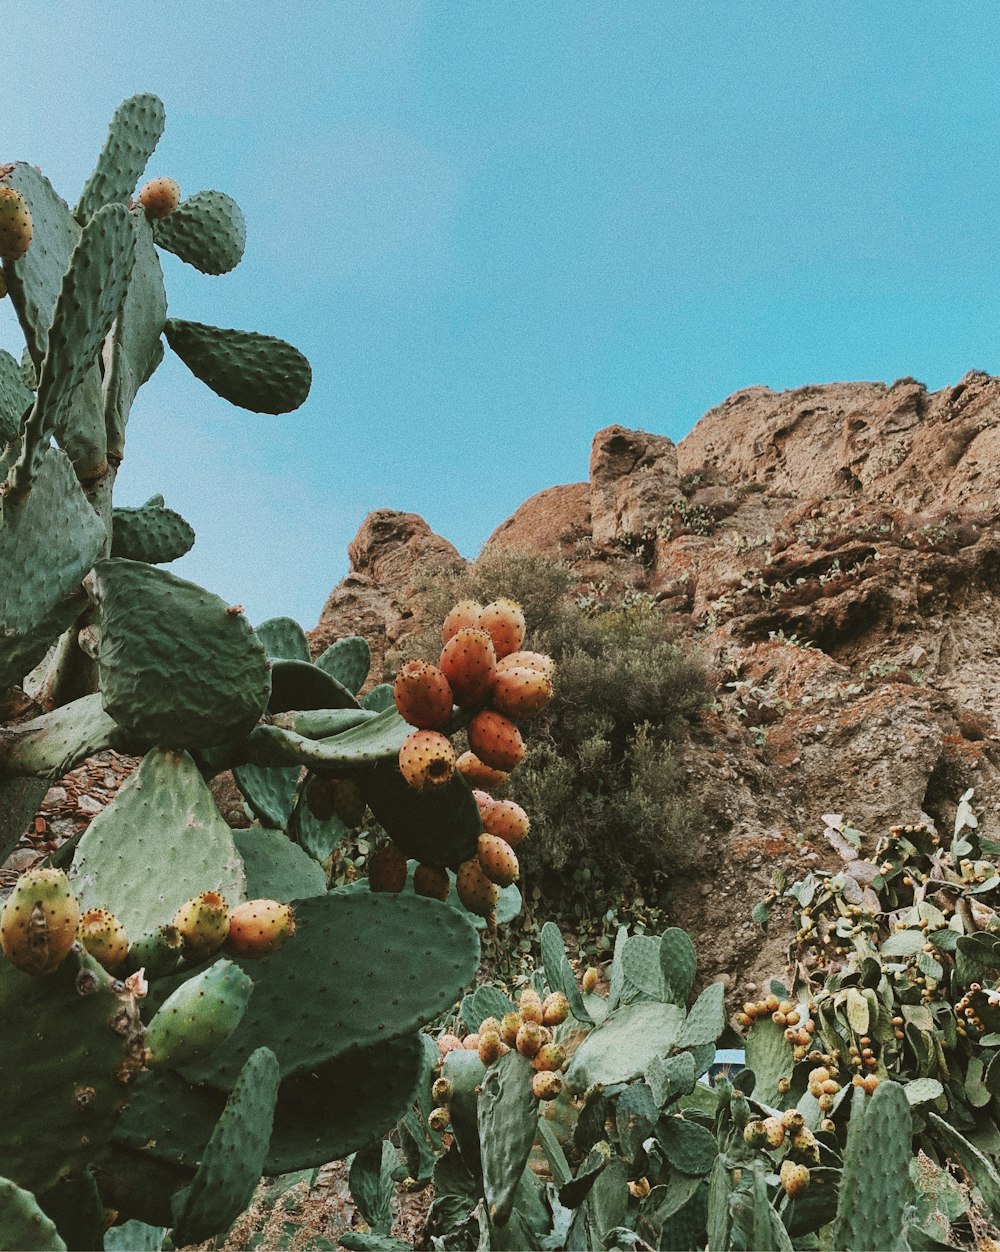 green cactus plant near brown rock formation during daytime